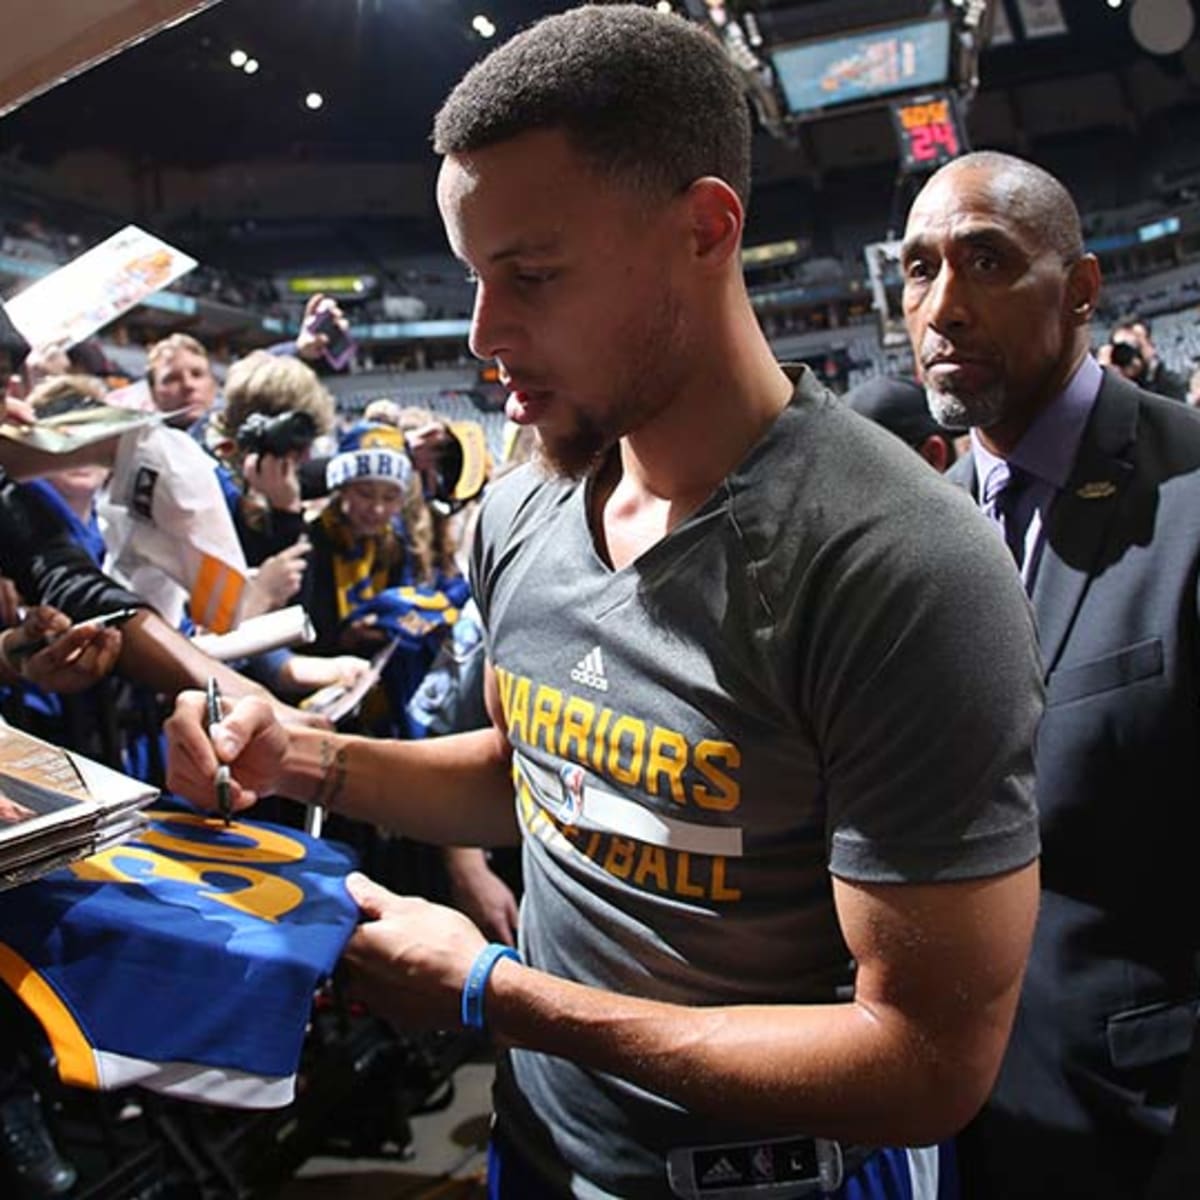 Baby Shawn meets Steph before Warriors-Heat, Sports